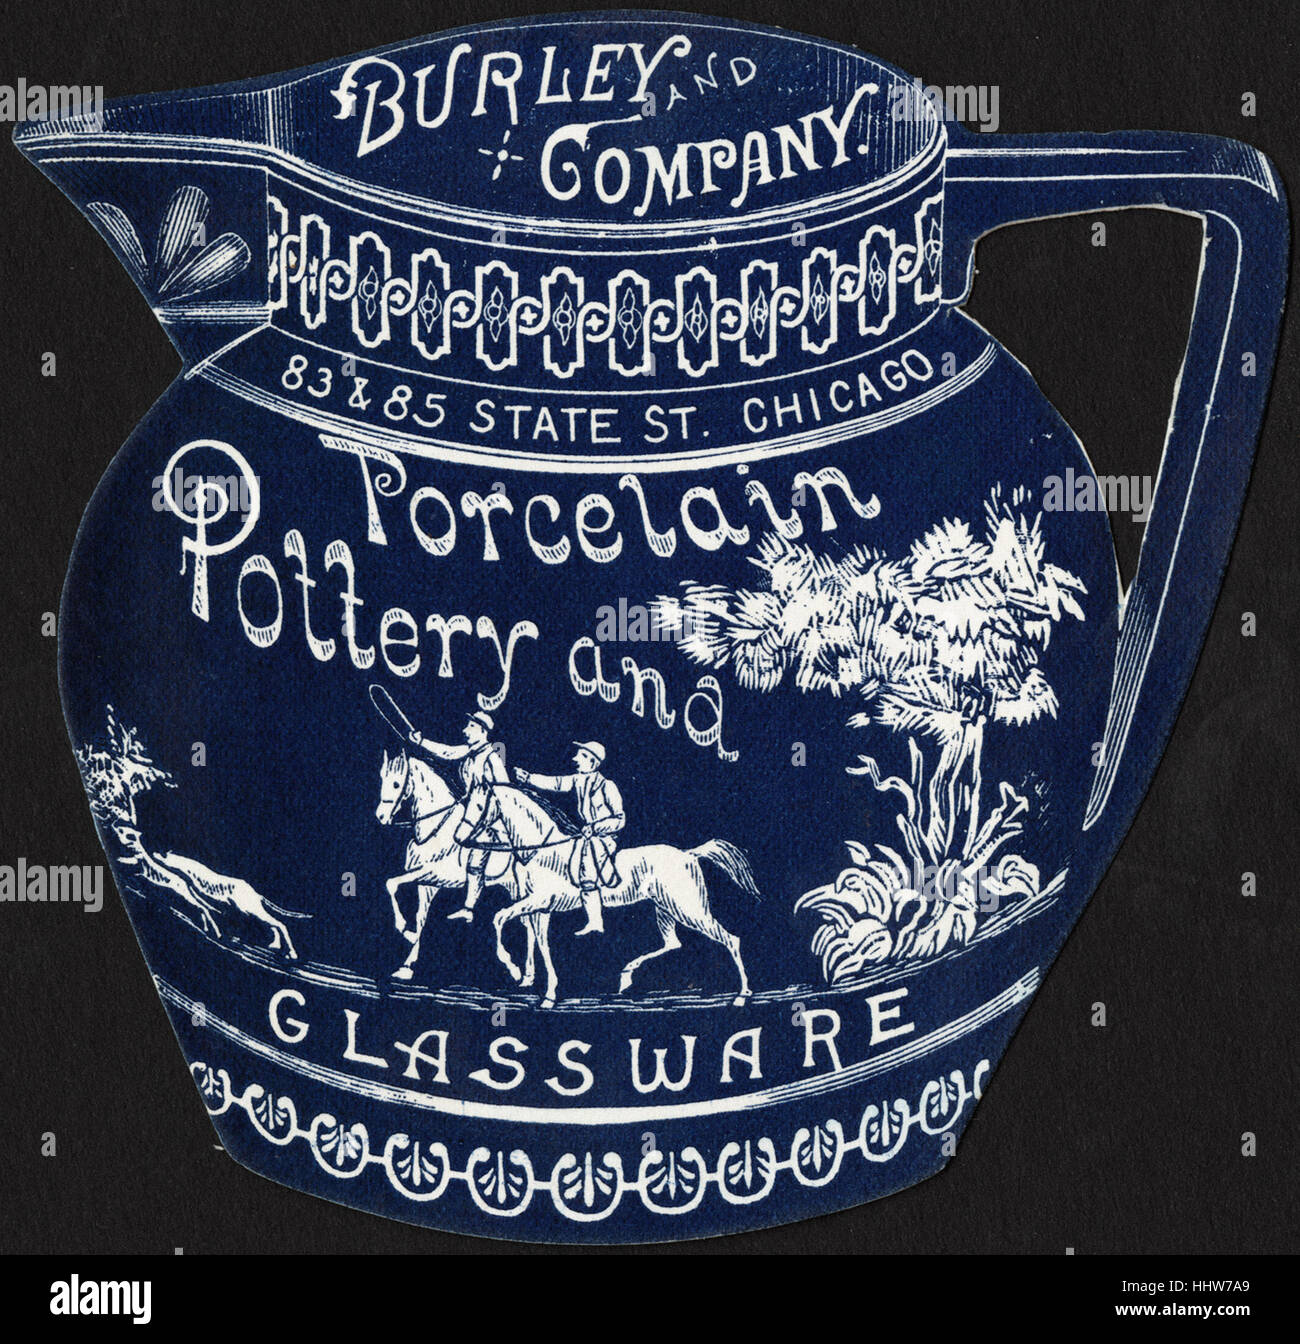 Burley and Company. Porcelain pottery and glassware. [front]  - Home Furnishings Trade Cards Stock Photo